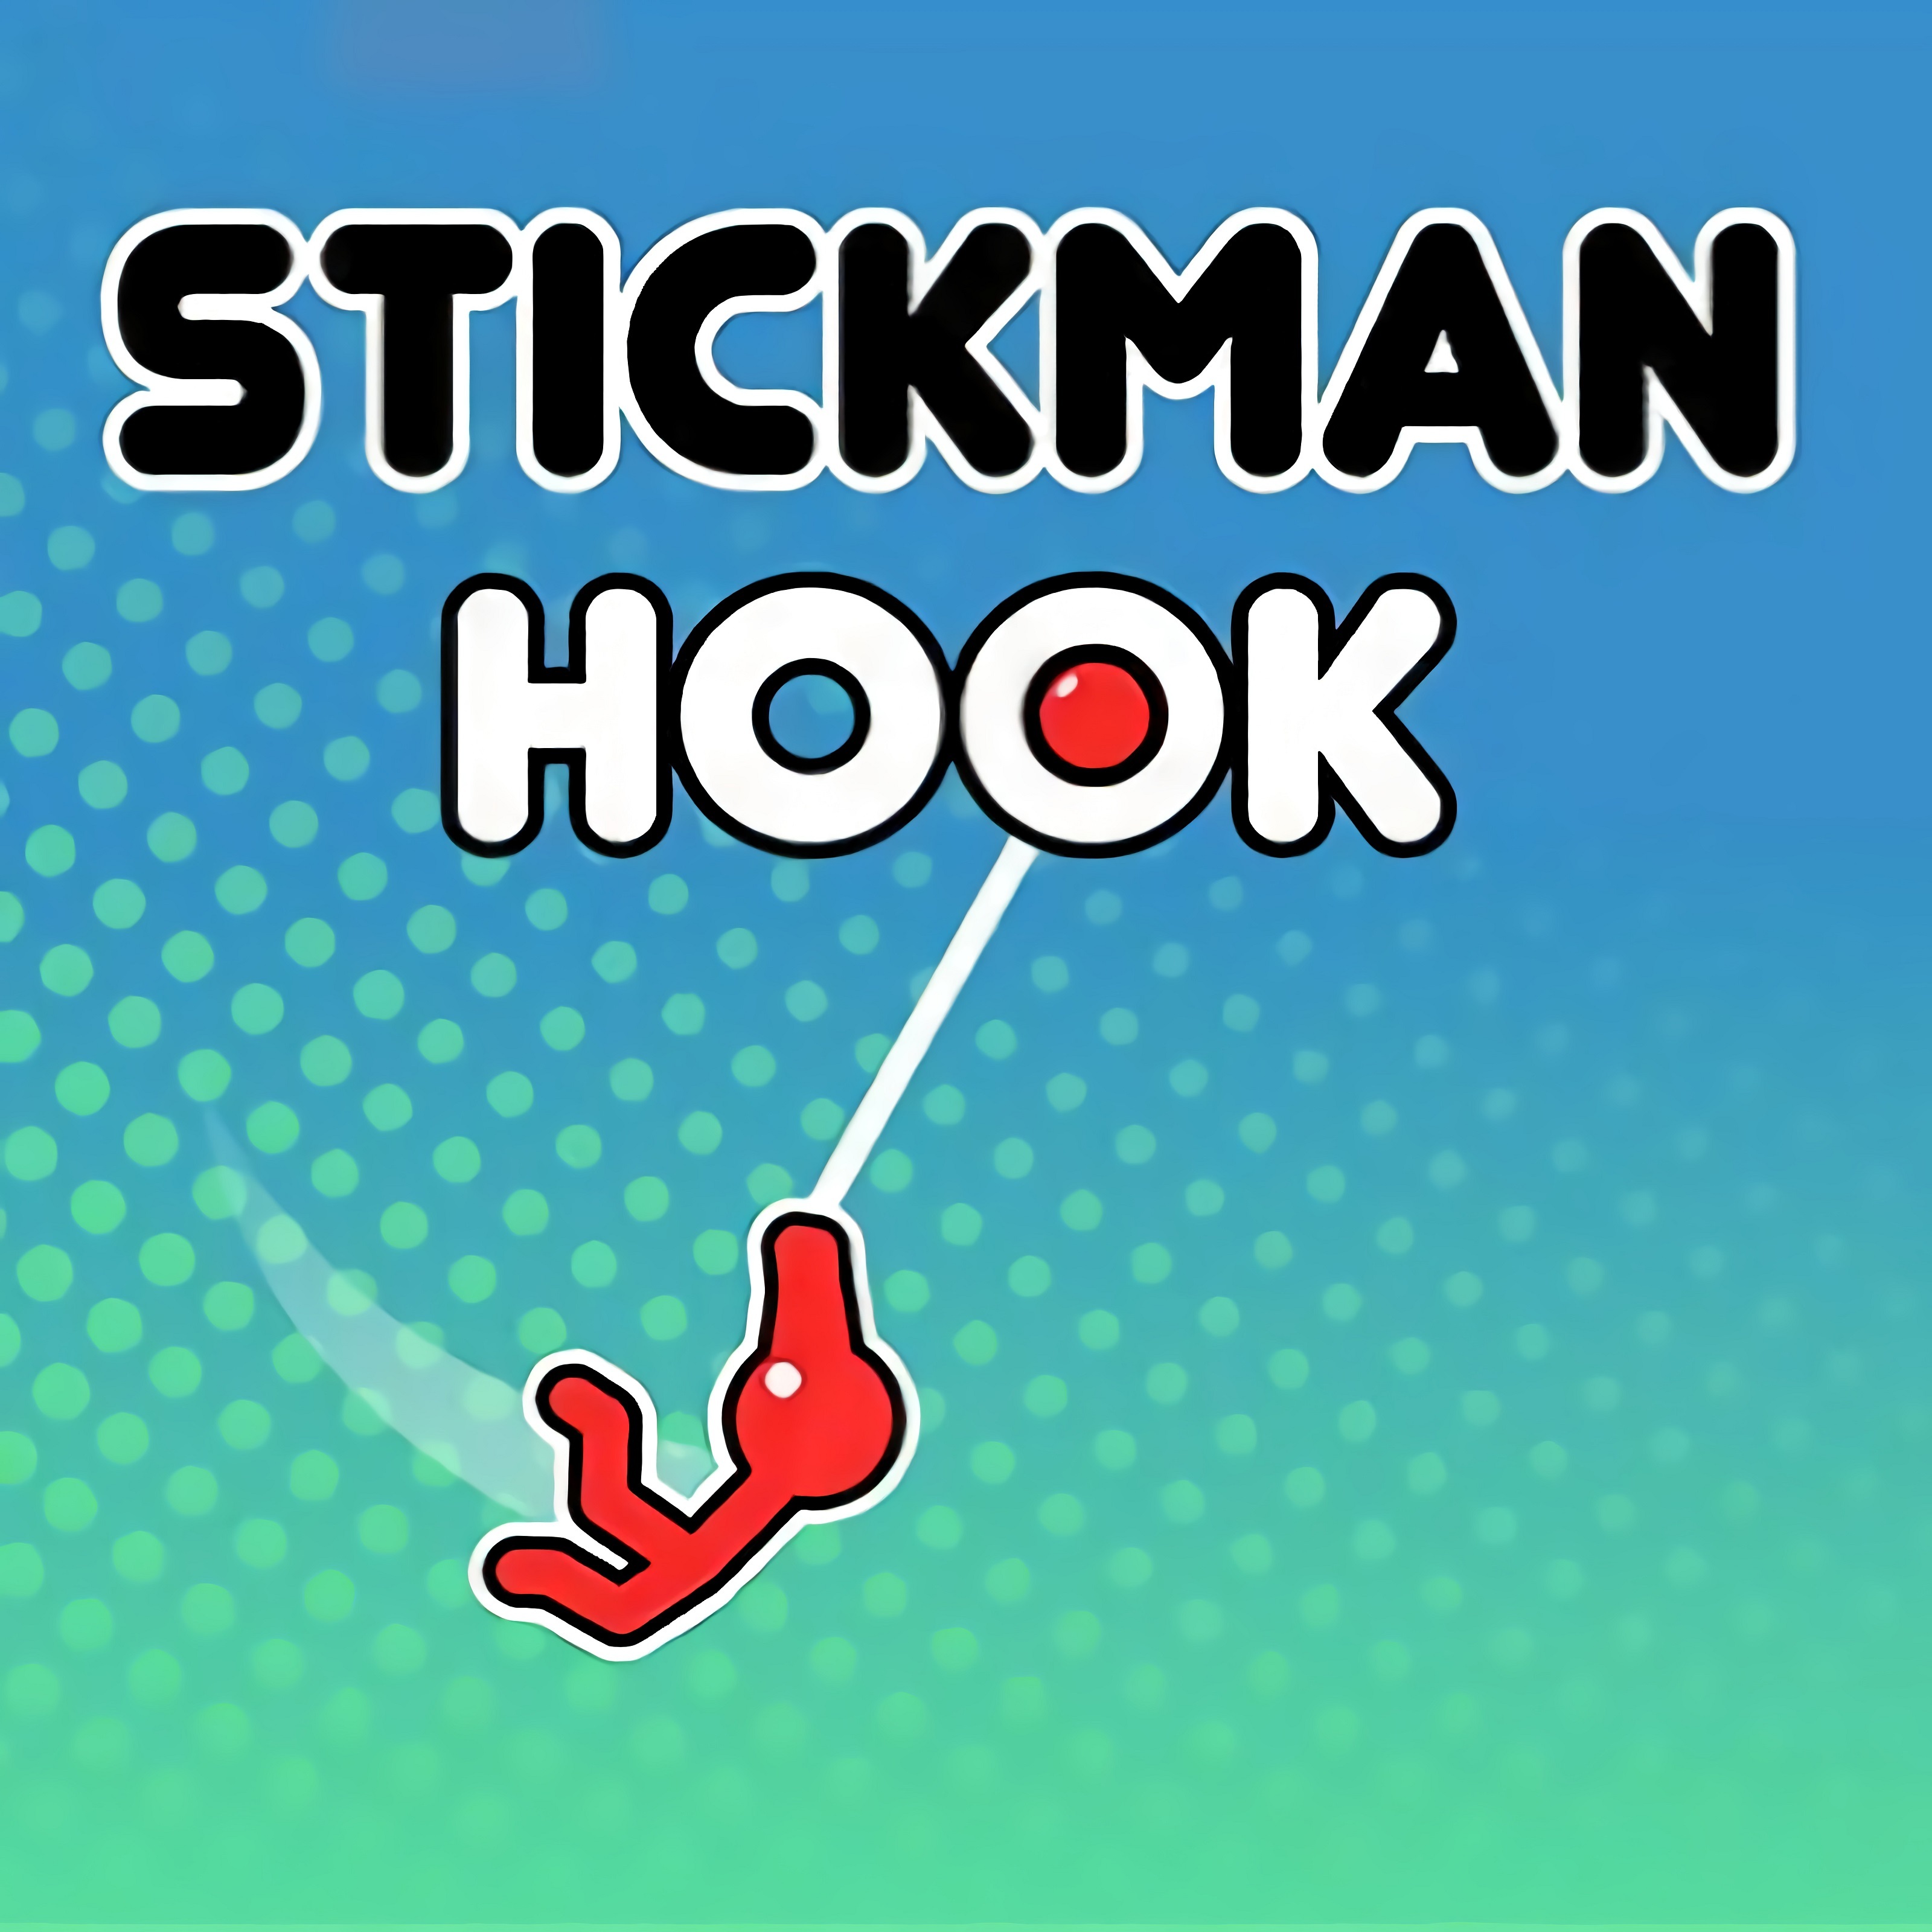 How To Play Stickman Hook